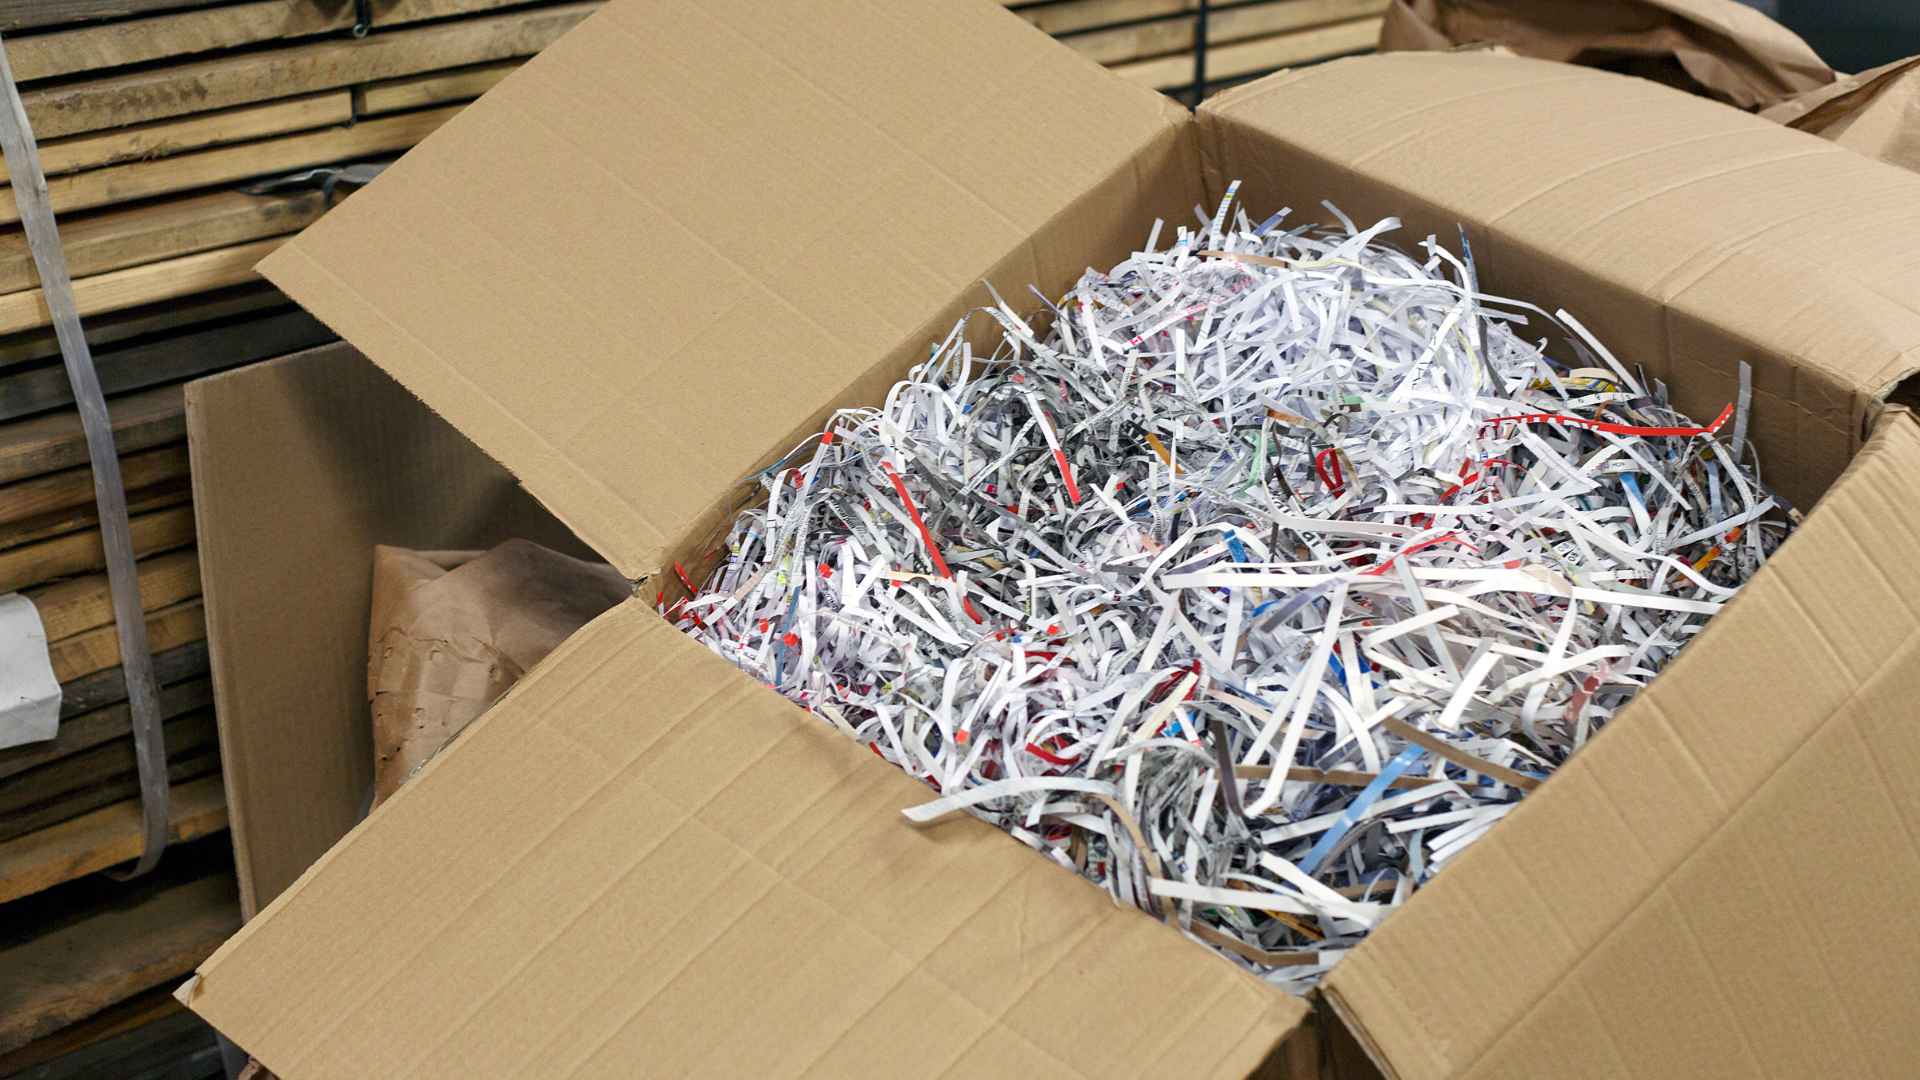 Confidential Information With Our Shredding Services in Brick NJ